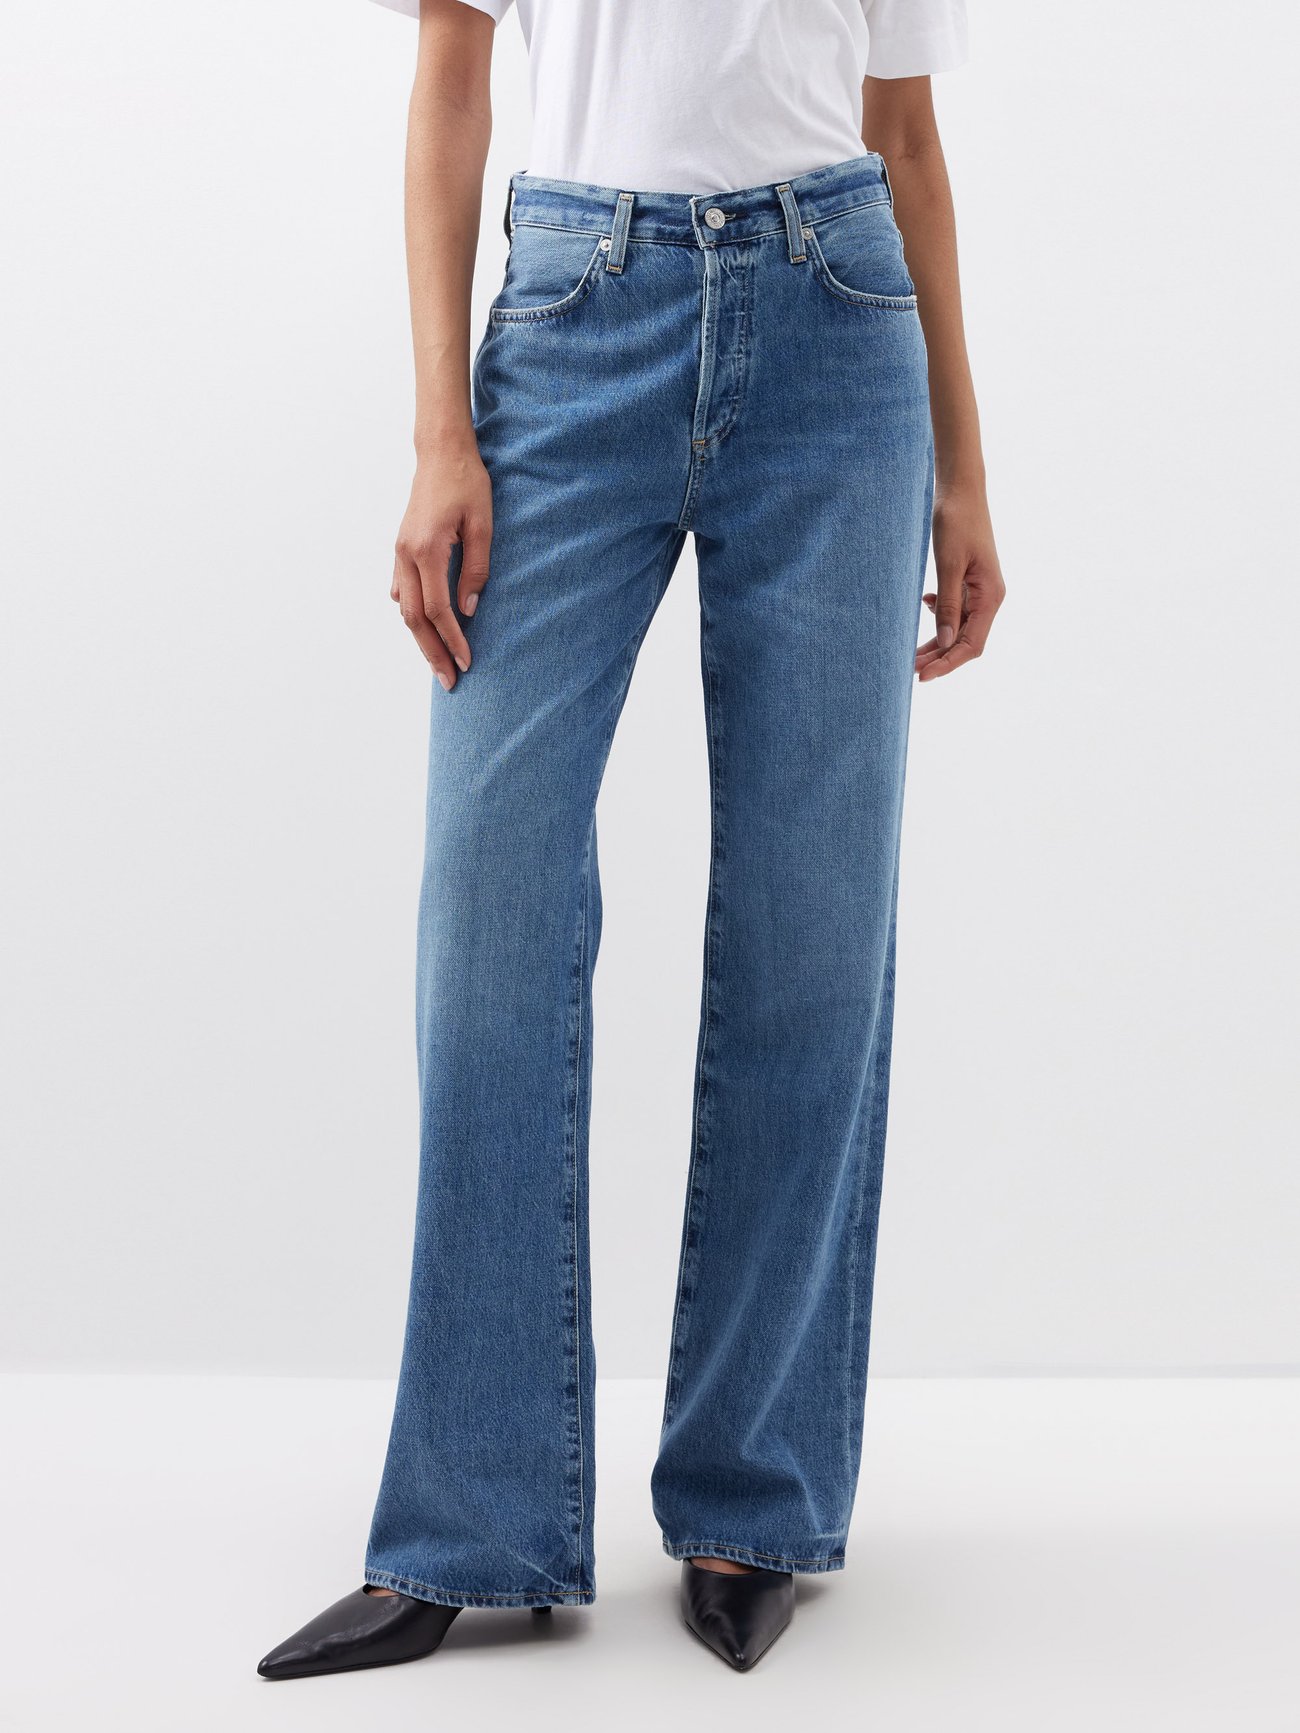 Blue Annina wide-leg jeans | Citizens of Humanity | MATCHES UK